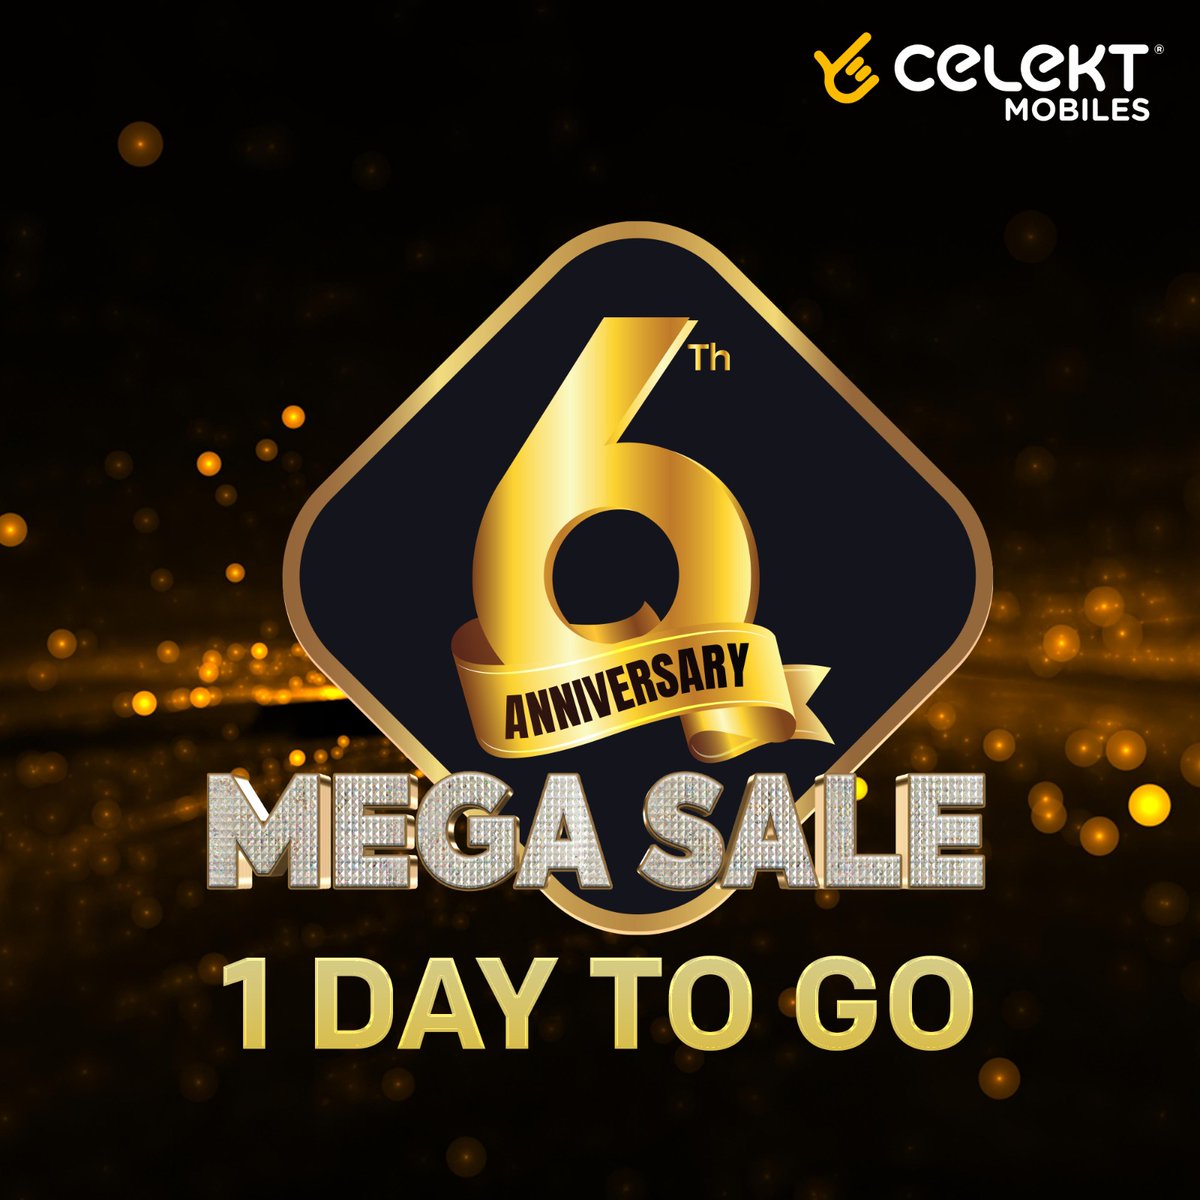 Get ready to celebrate big savings at the Celekt 6th Anniversary Sale - Just 1 day to go!🥳🎉❤️
#6thanniversary #6thanniversarysale #NewArrivals2024 #newarrival #smartphone #1DayToGo #mobileaccessories #tv #soundbars #sale #offers #celektmobiles